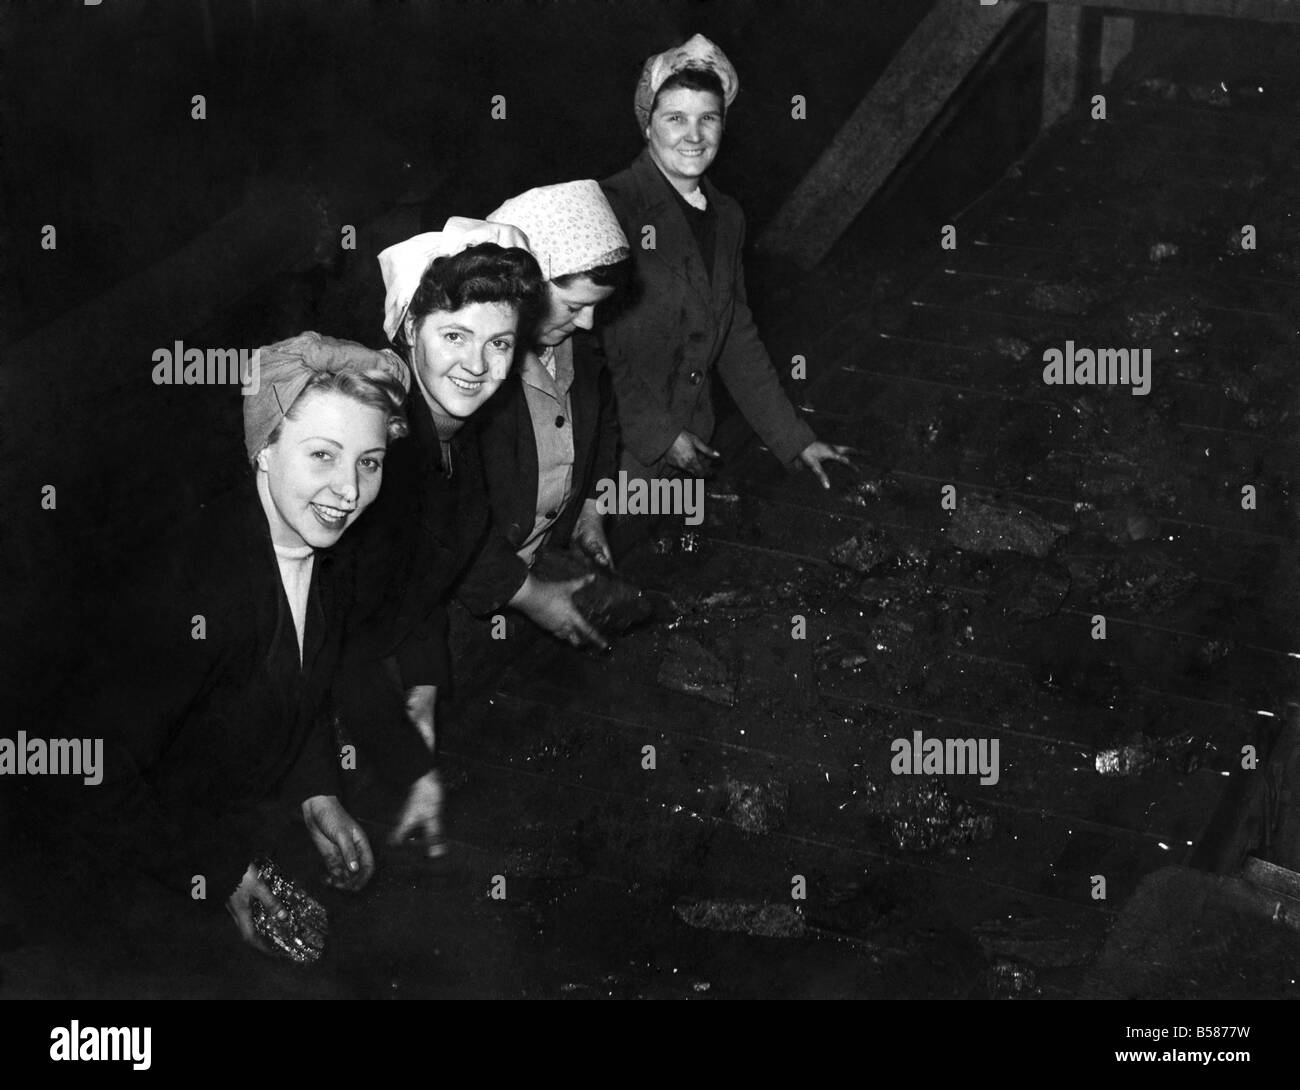 Astley Green Colliery. Women sreeners at Astley Green Pit cleaning the coal of 'dirt' as it passes them on a conveyor belt at the pit head. April 1951 P005127 Stock Photo